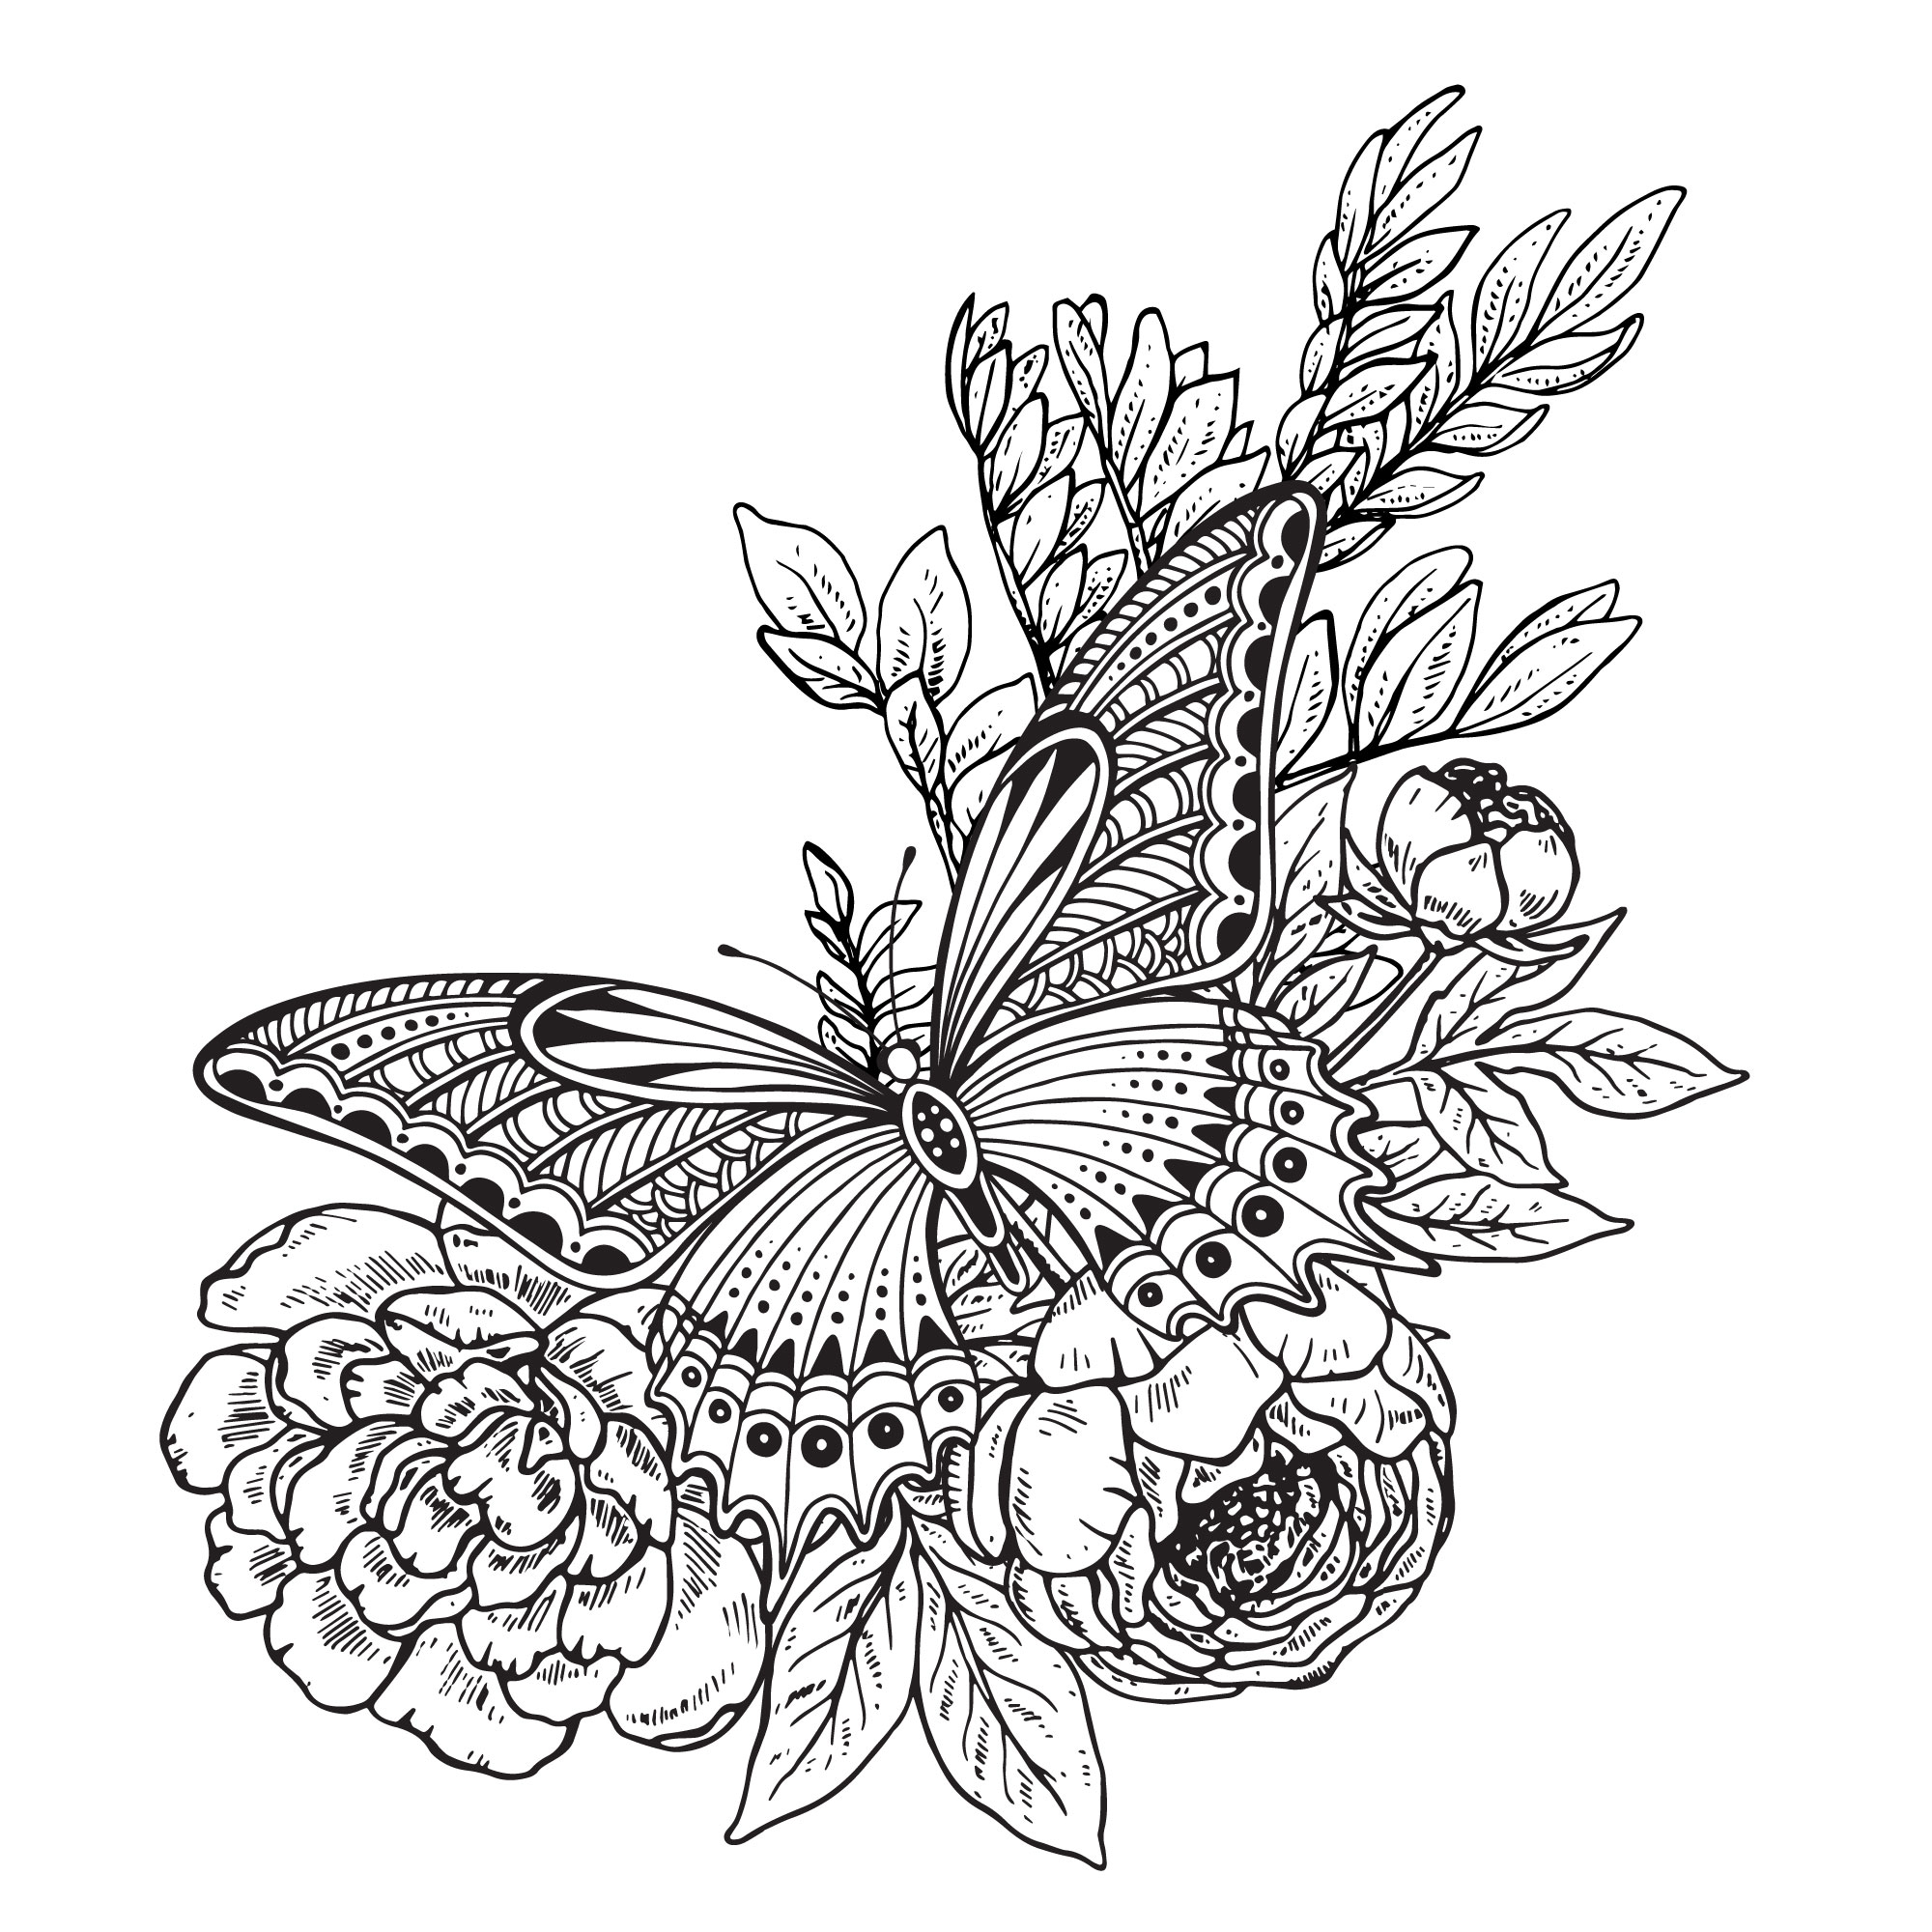 Butterfly And Flower Designs Drawing